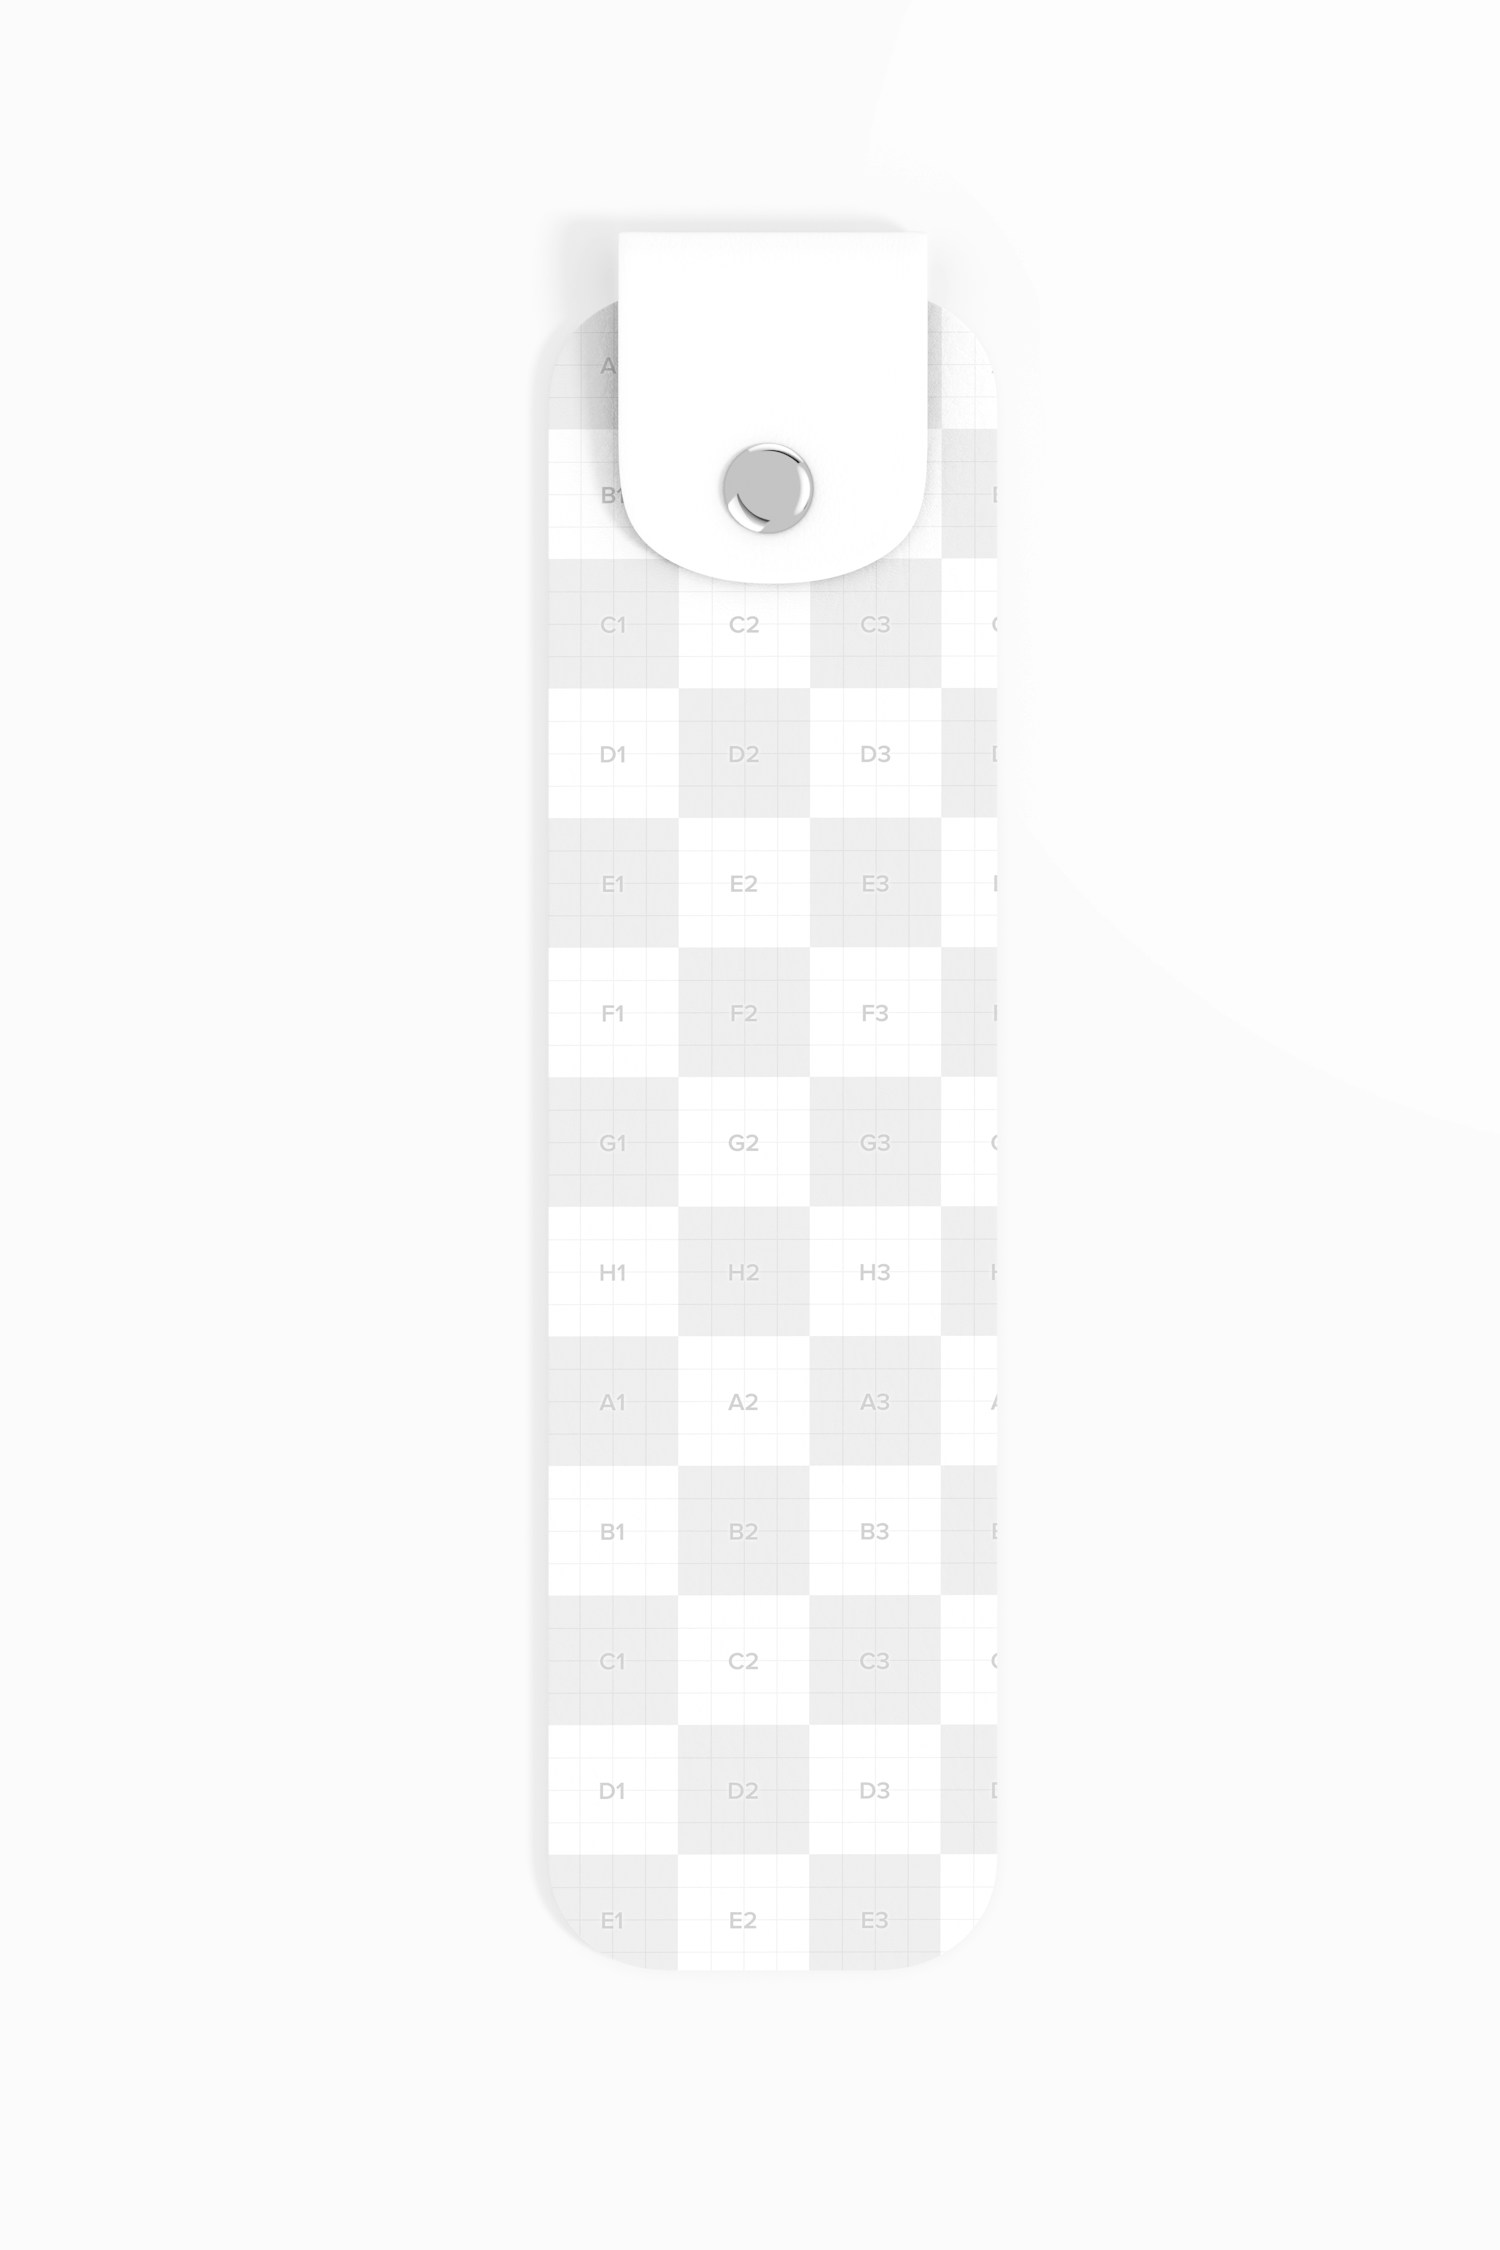 Leather Bookmark Mockup, Front View